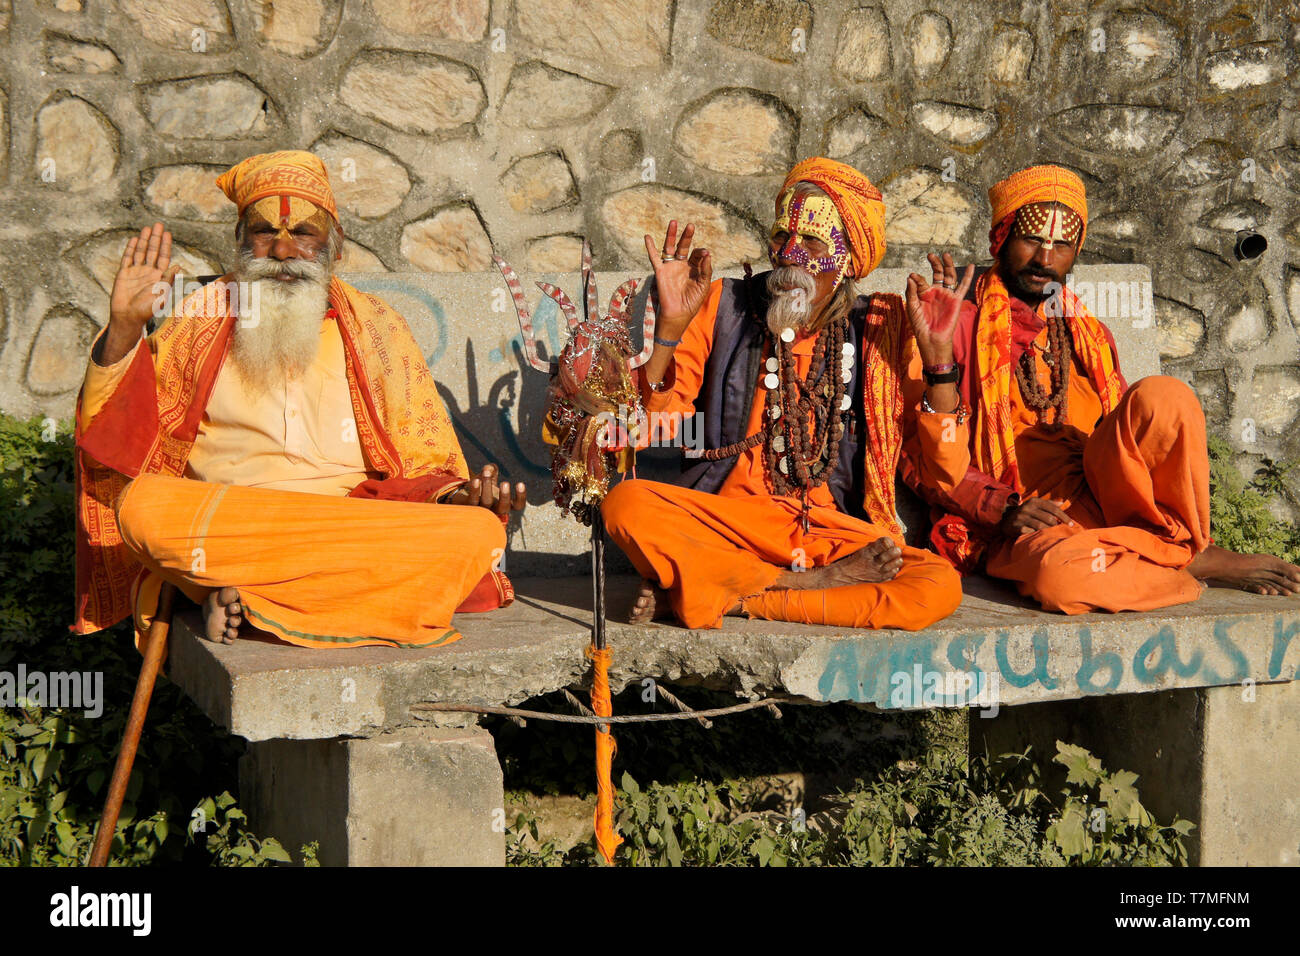 Three sadhus (holy men) with painted faces, clad in orange robes, sit on a bench at Pashupatinath Hindu temple, Kathmandu Valley, Nepal Stock Photo